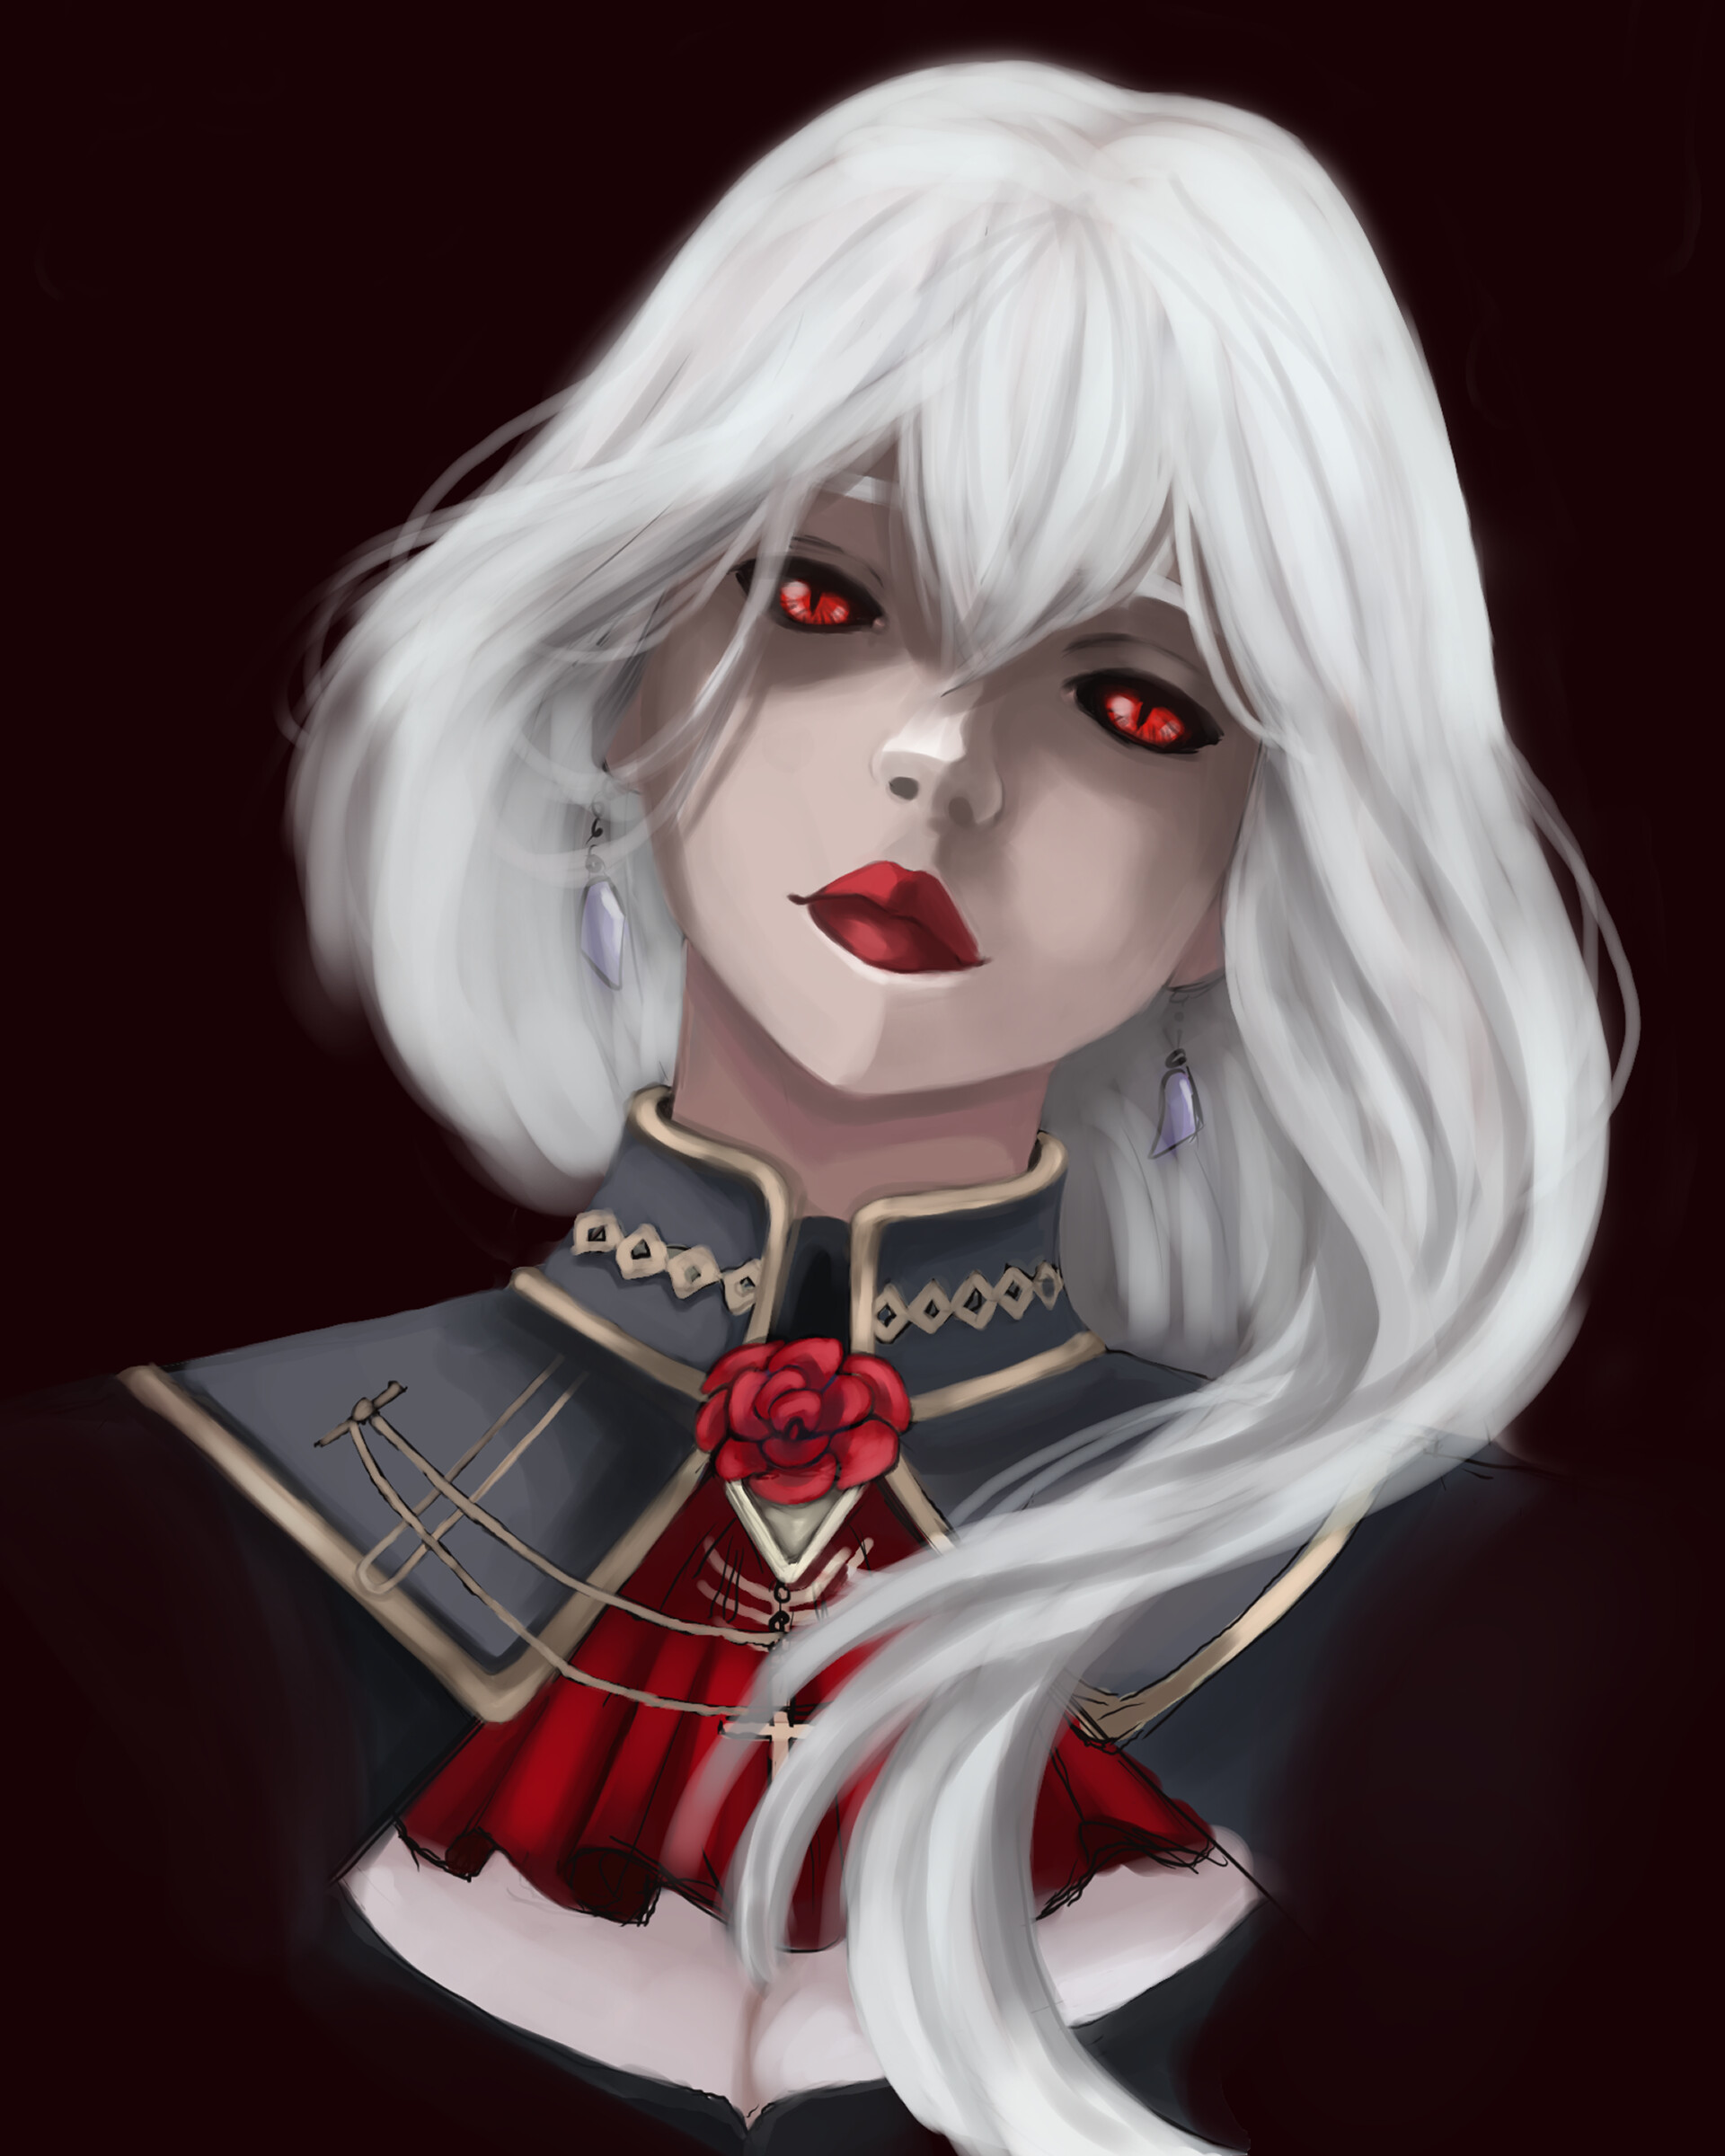 vampire anime girl with silver hair and red eyes